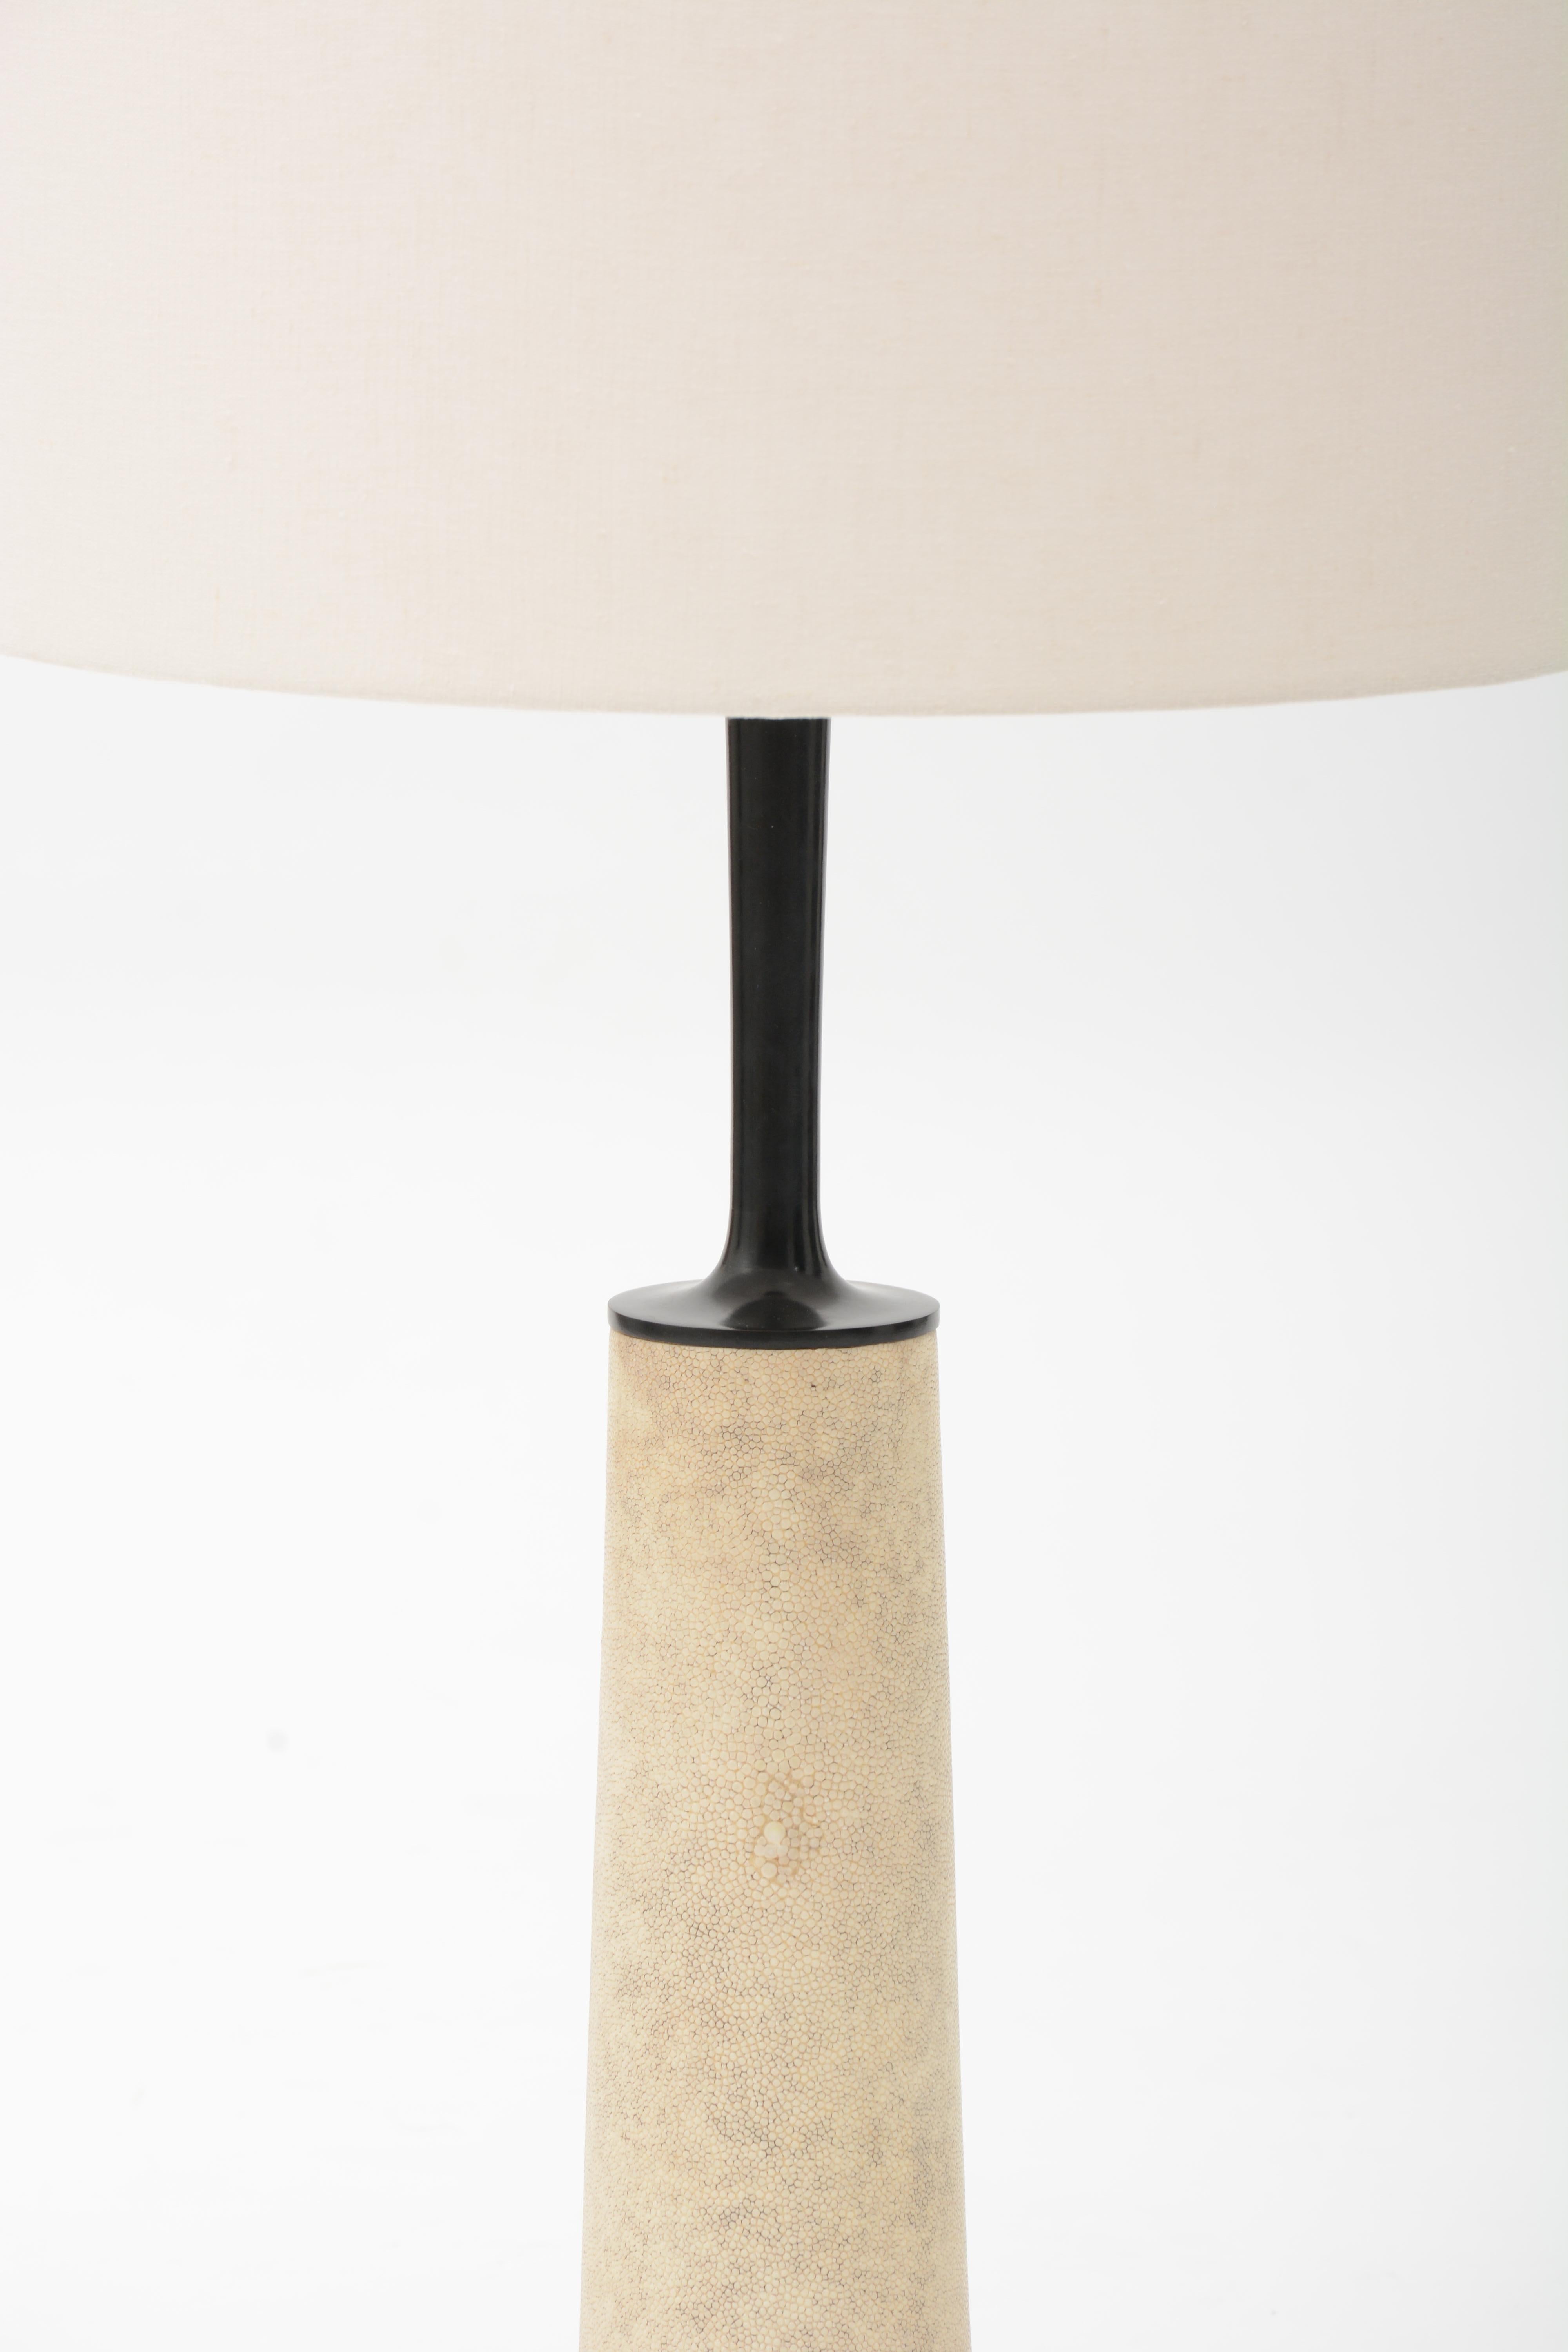 Jaya Table Lamp - Bronze and Shagreen Table Lamp by Elan Atelier In New Condition For Sale In New York, NY